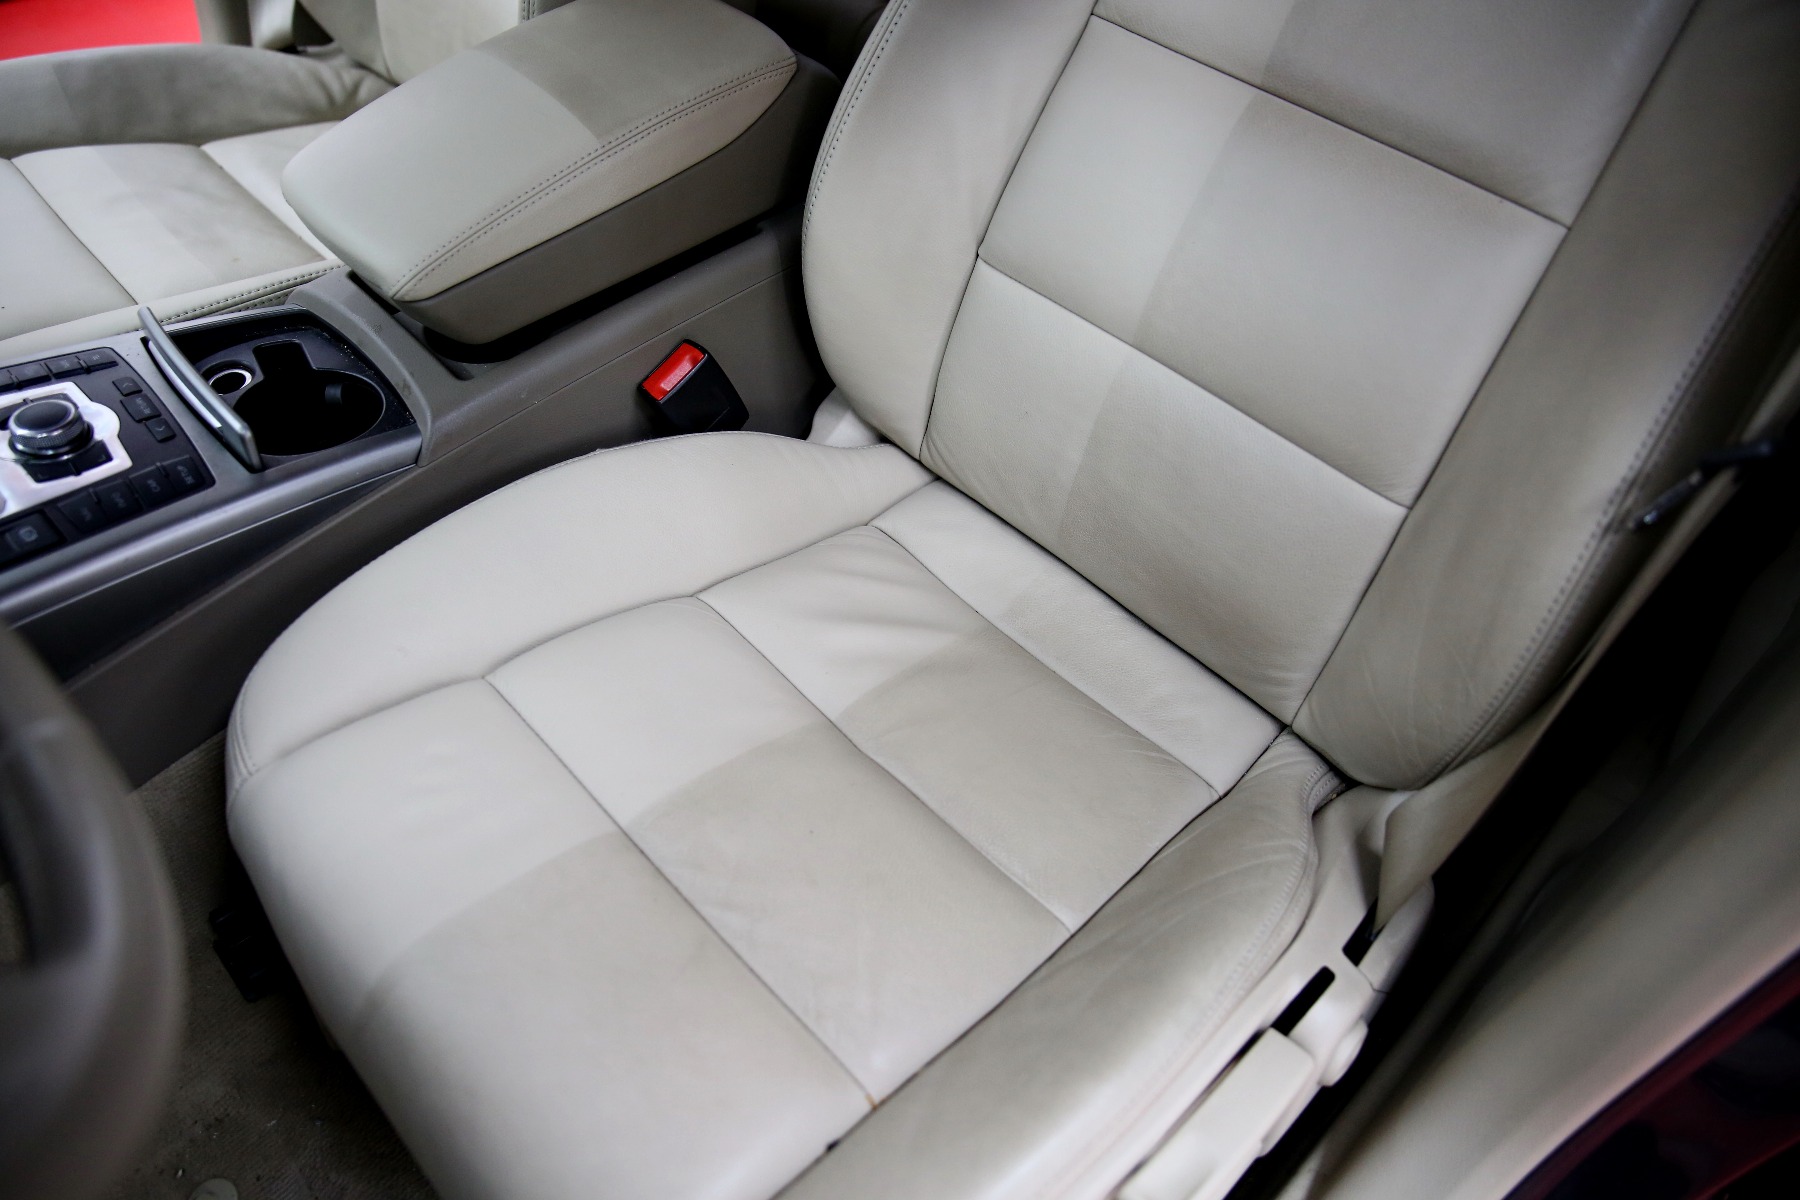 Restoring Leather Seats In A Classic Car - Recover Leather Car Seats Uk